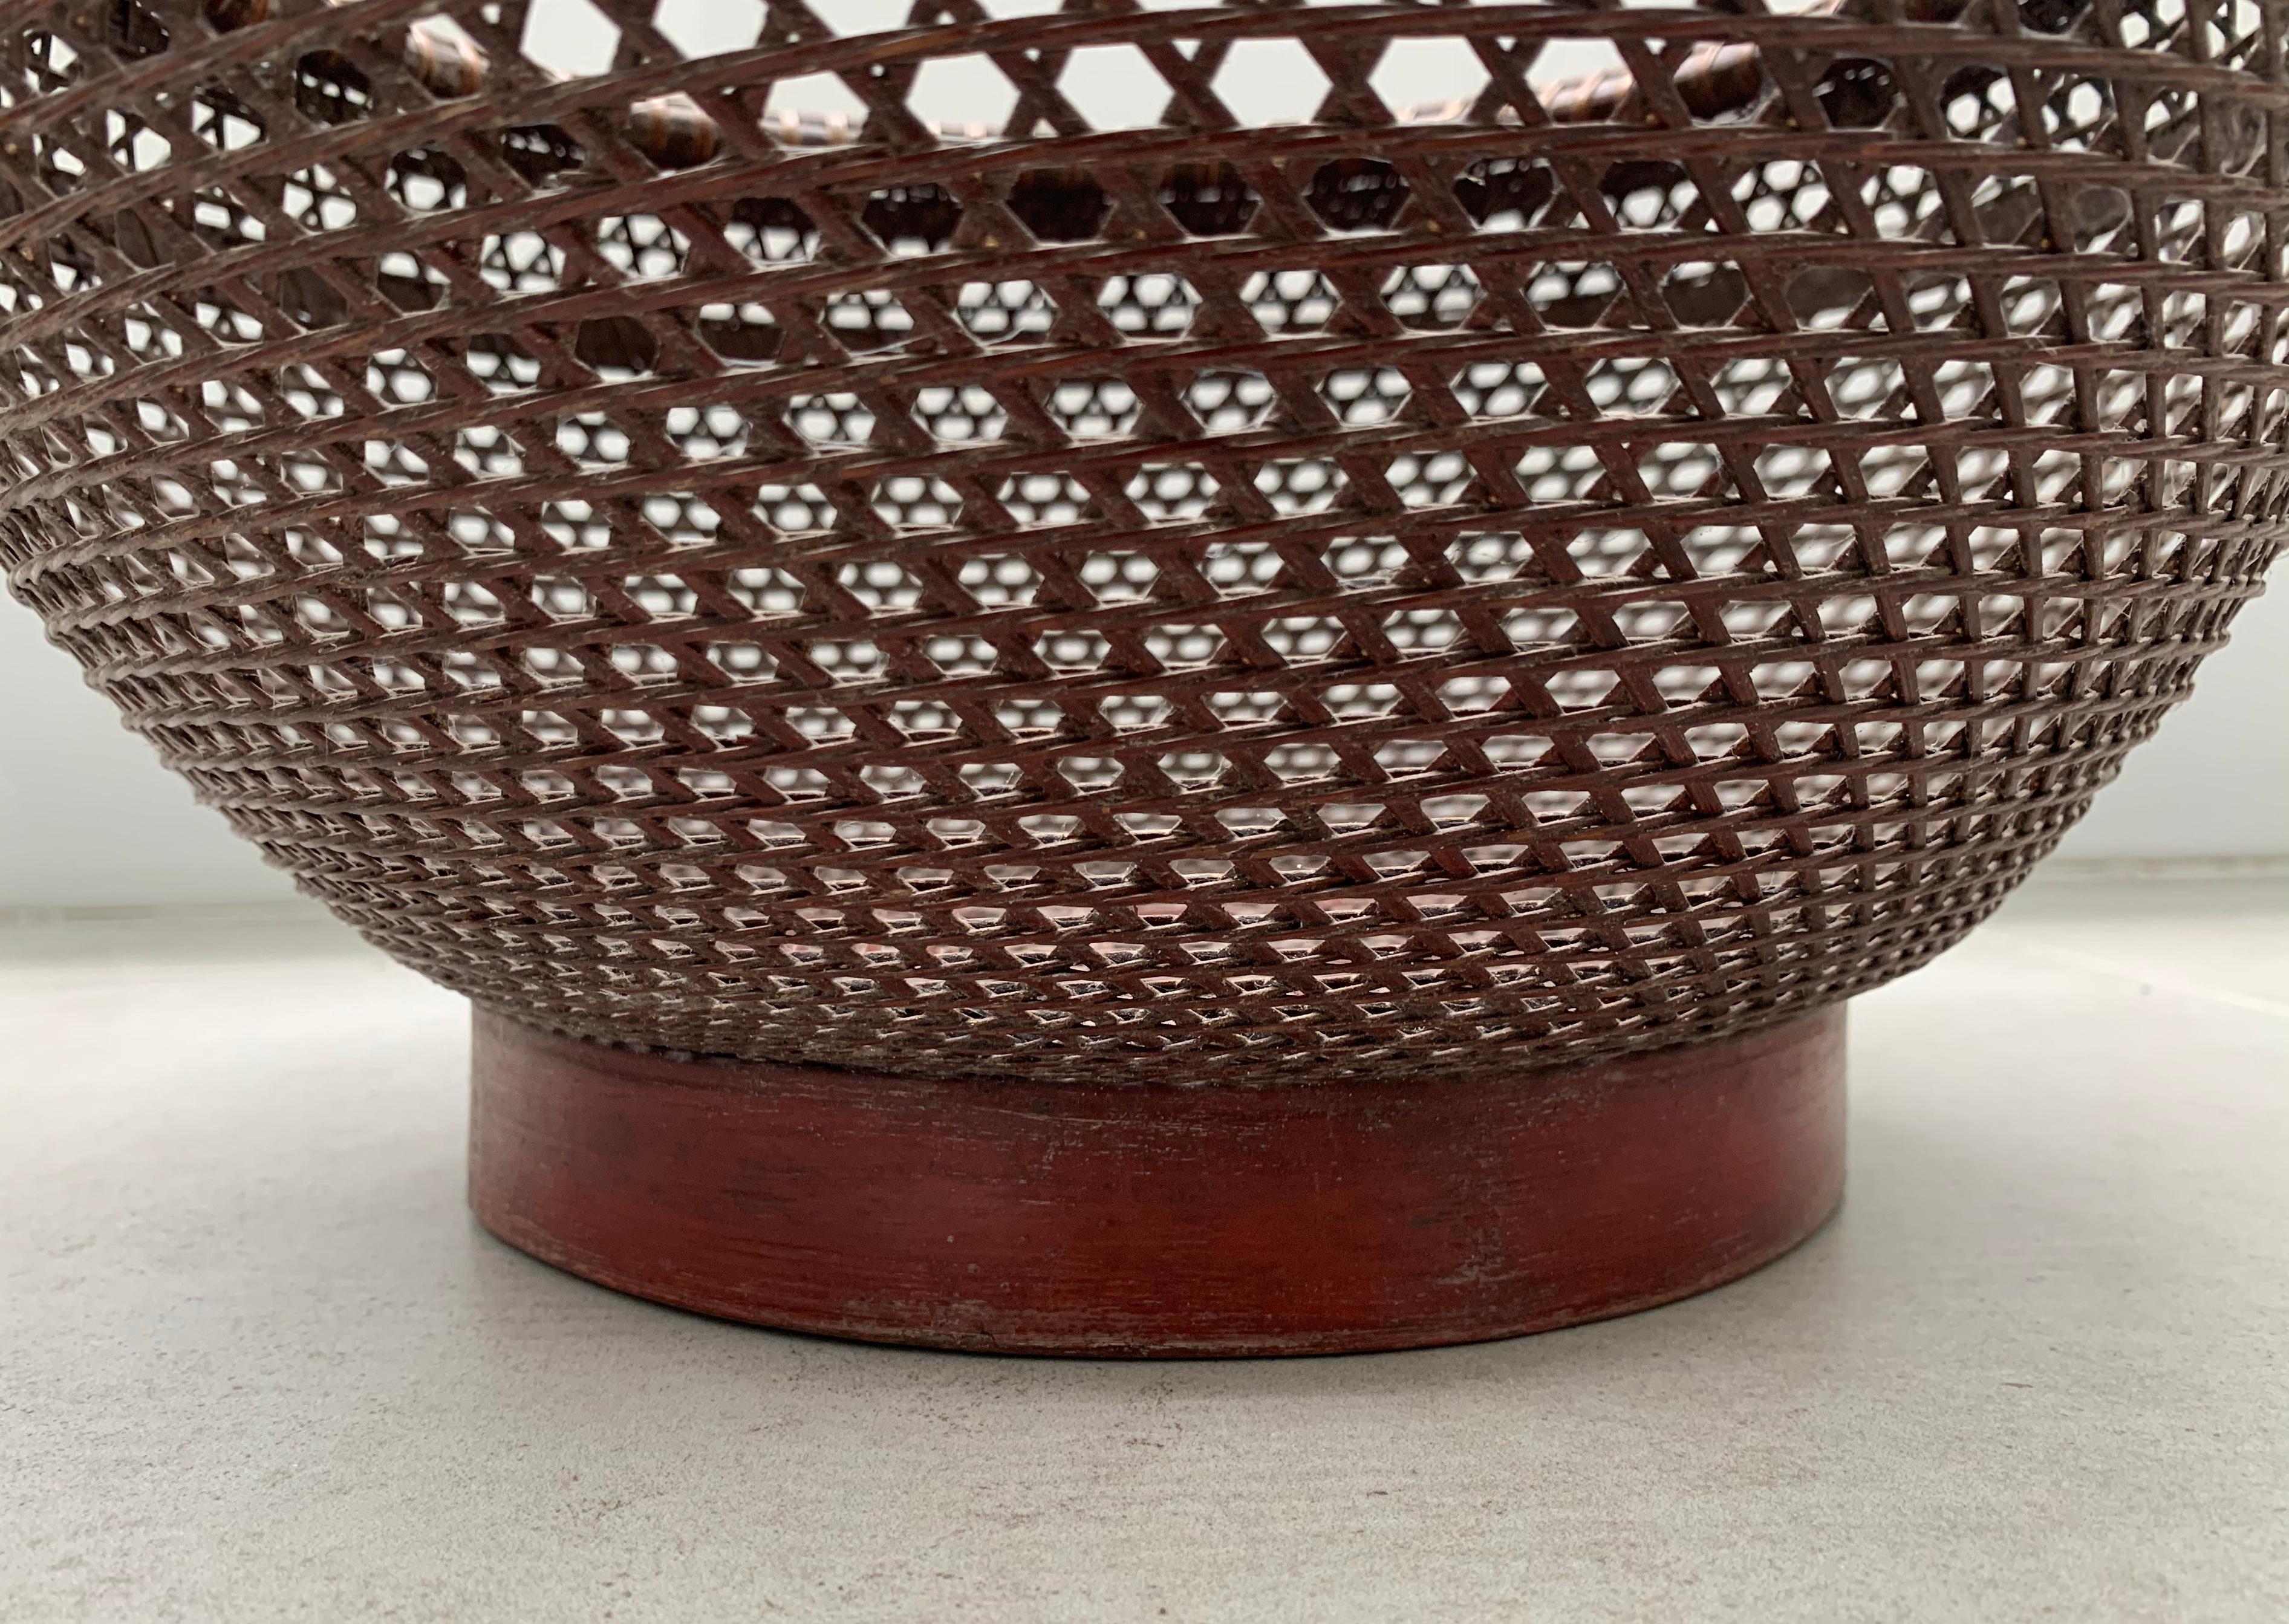 Chinese Basket Pair Hand-Woven Rattan with Red Wood Base, Early 20th Century For Sale 5